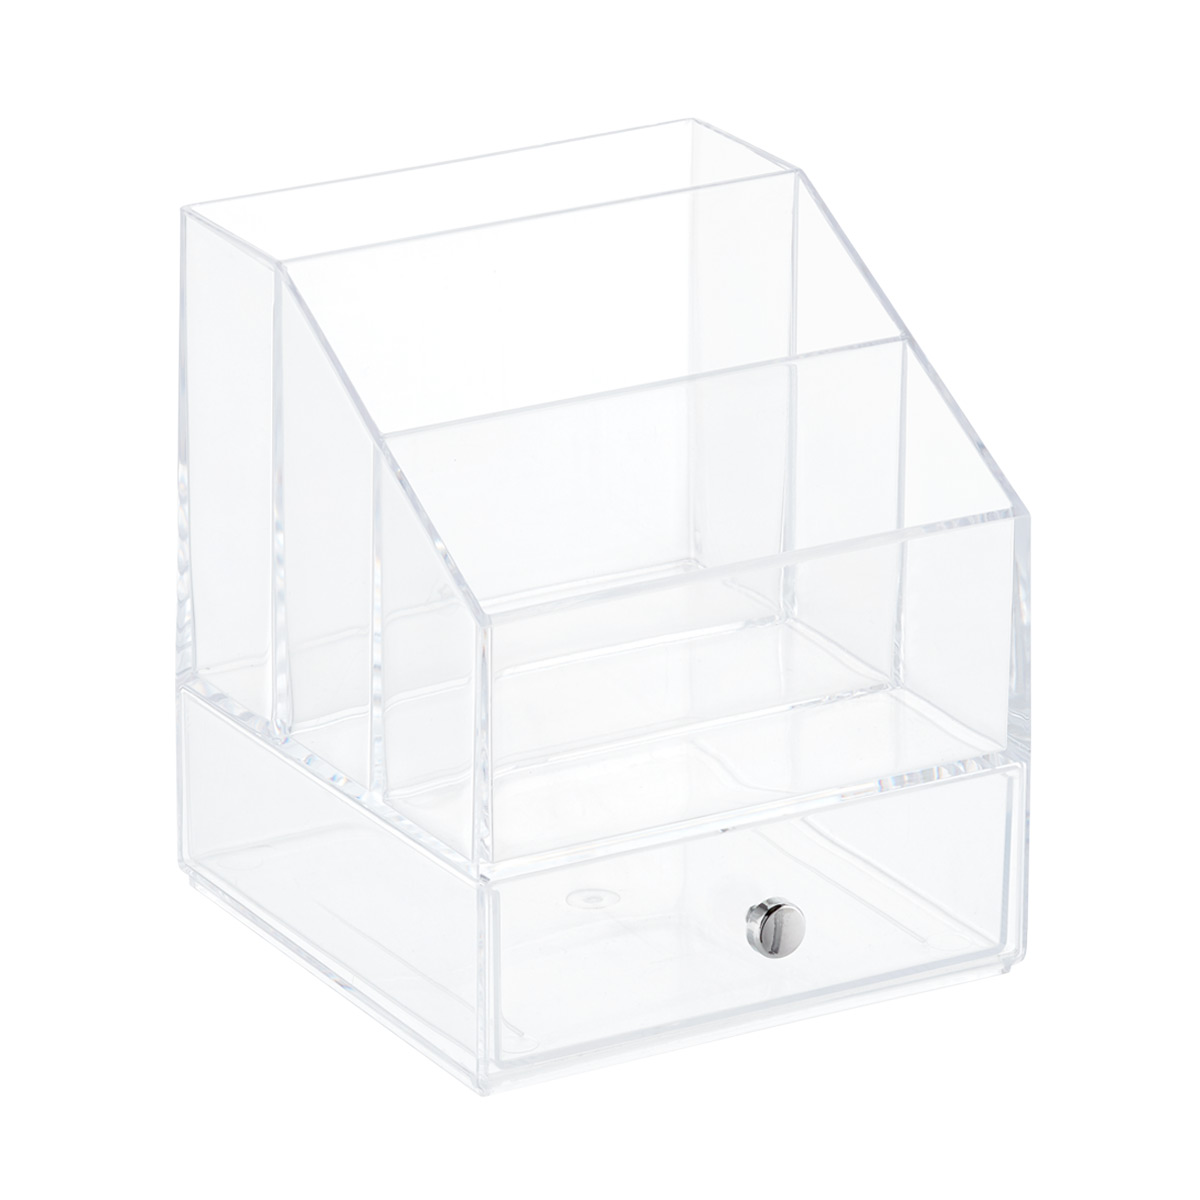 iDesign Clarity Stackable Makeup System | The Container Store